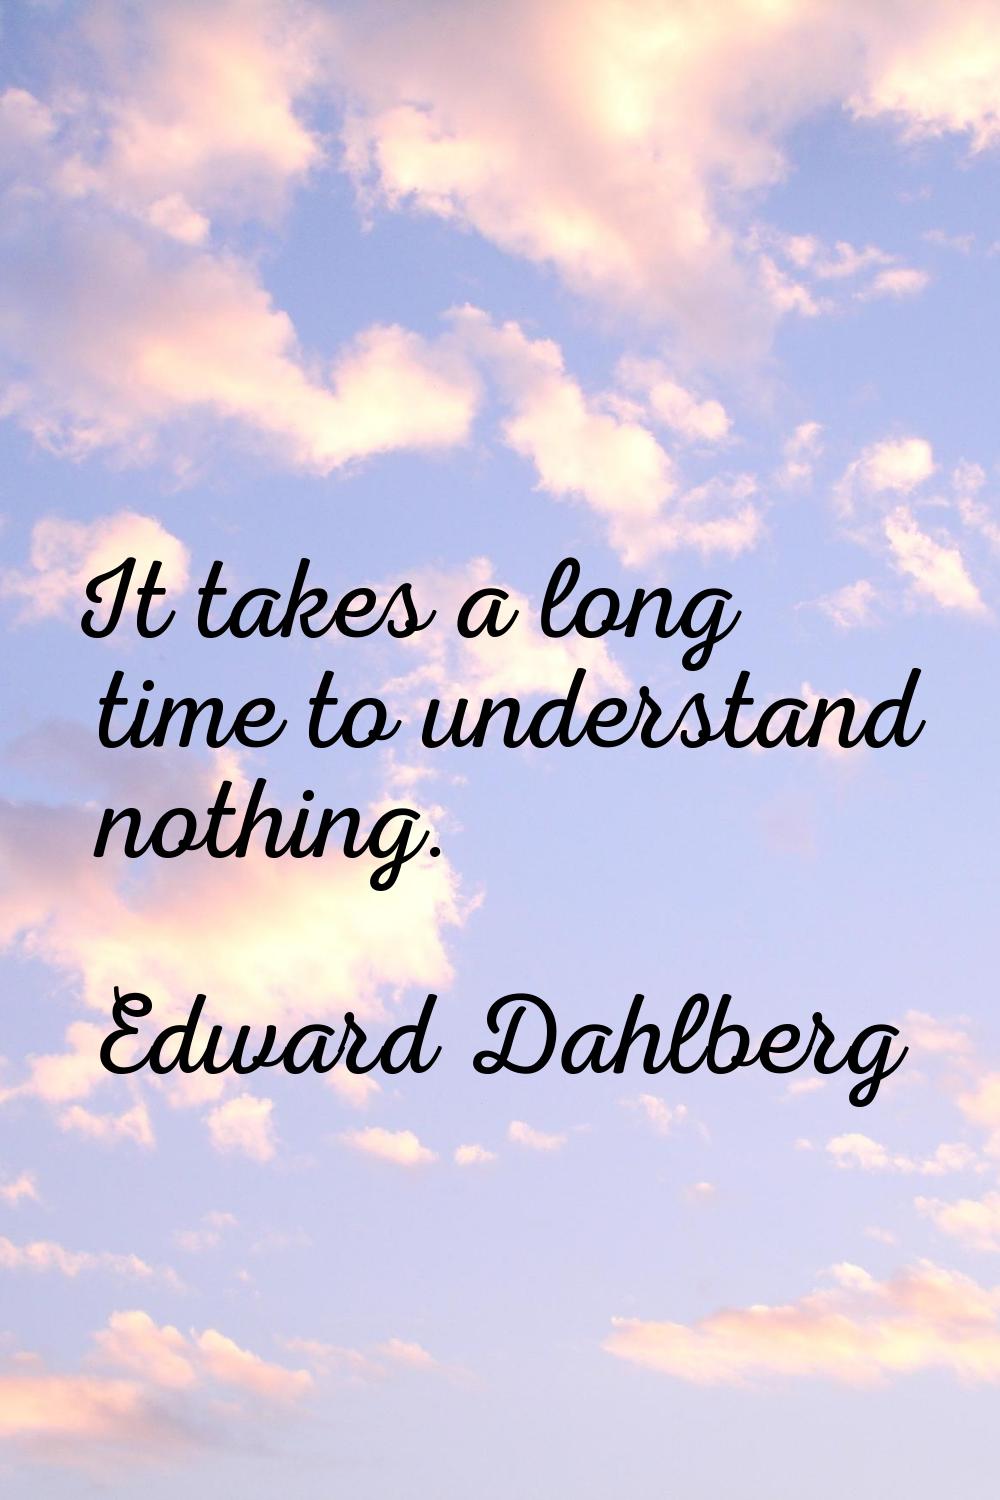 It takes a long time to understand nothing.